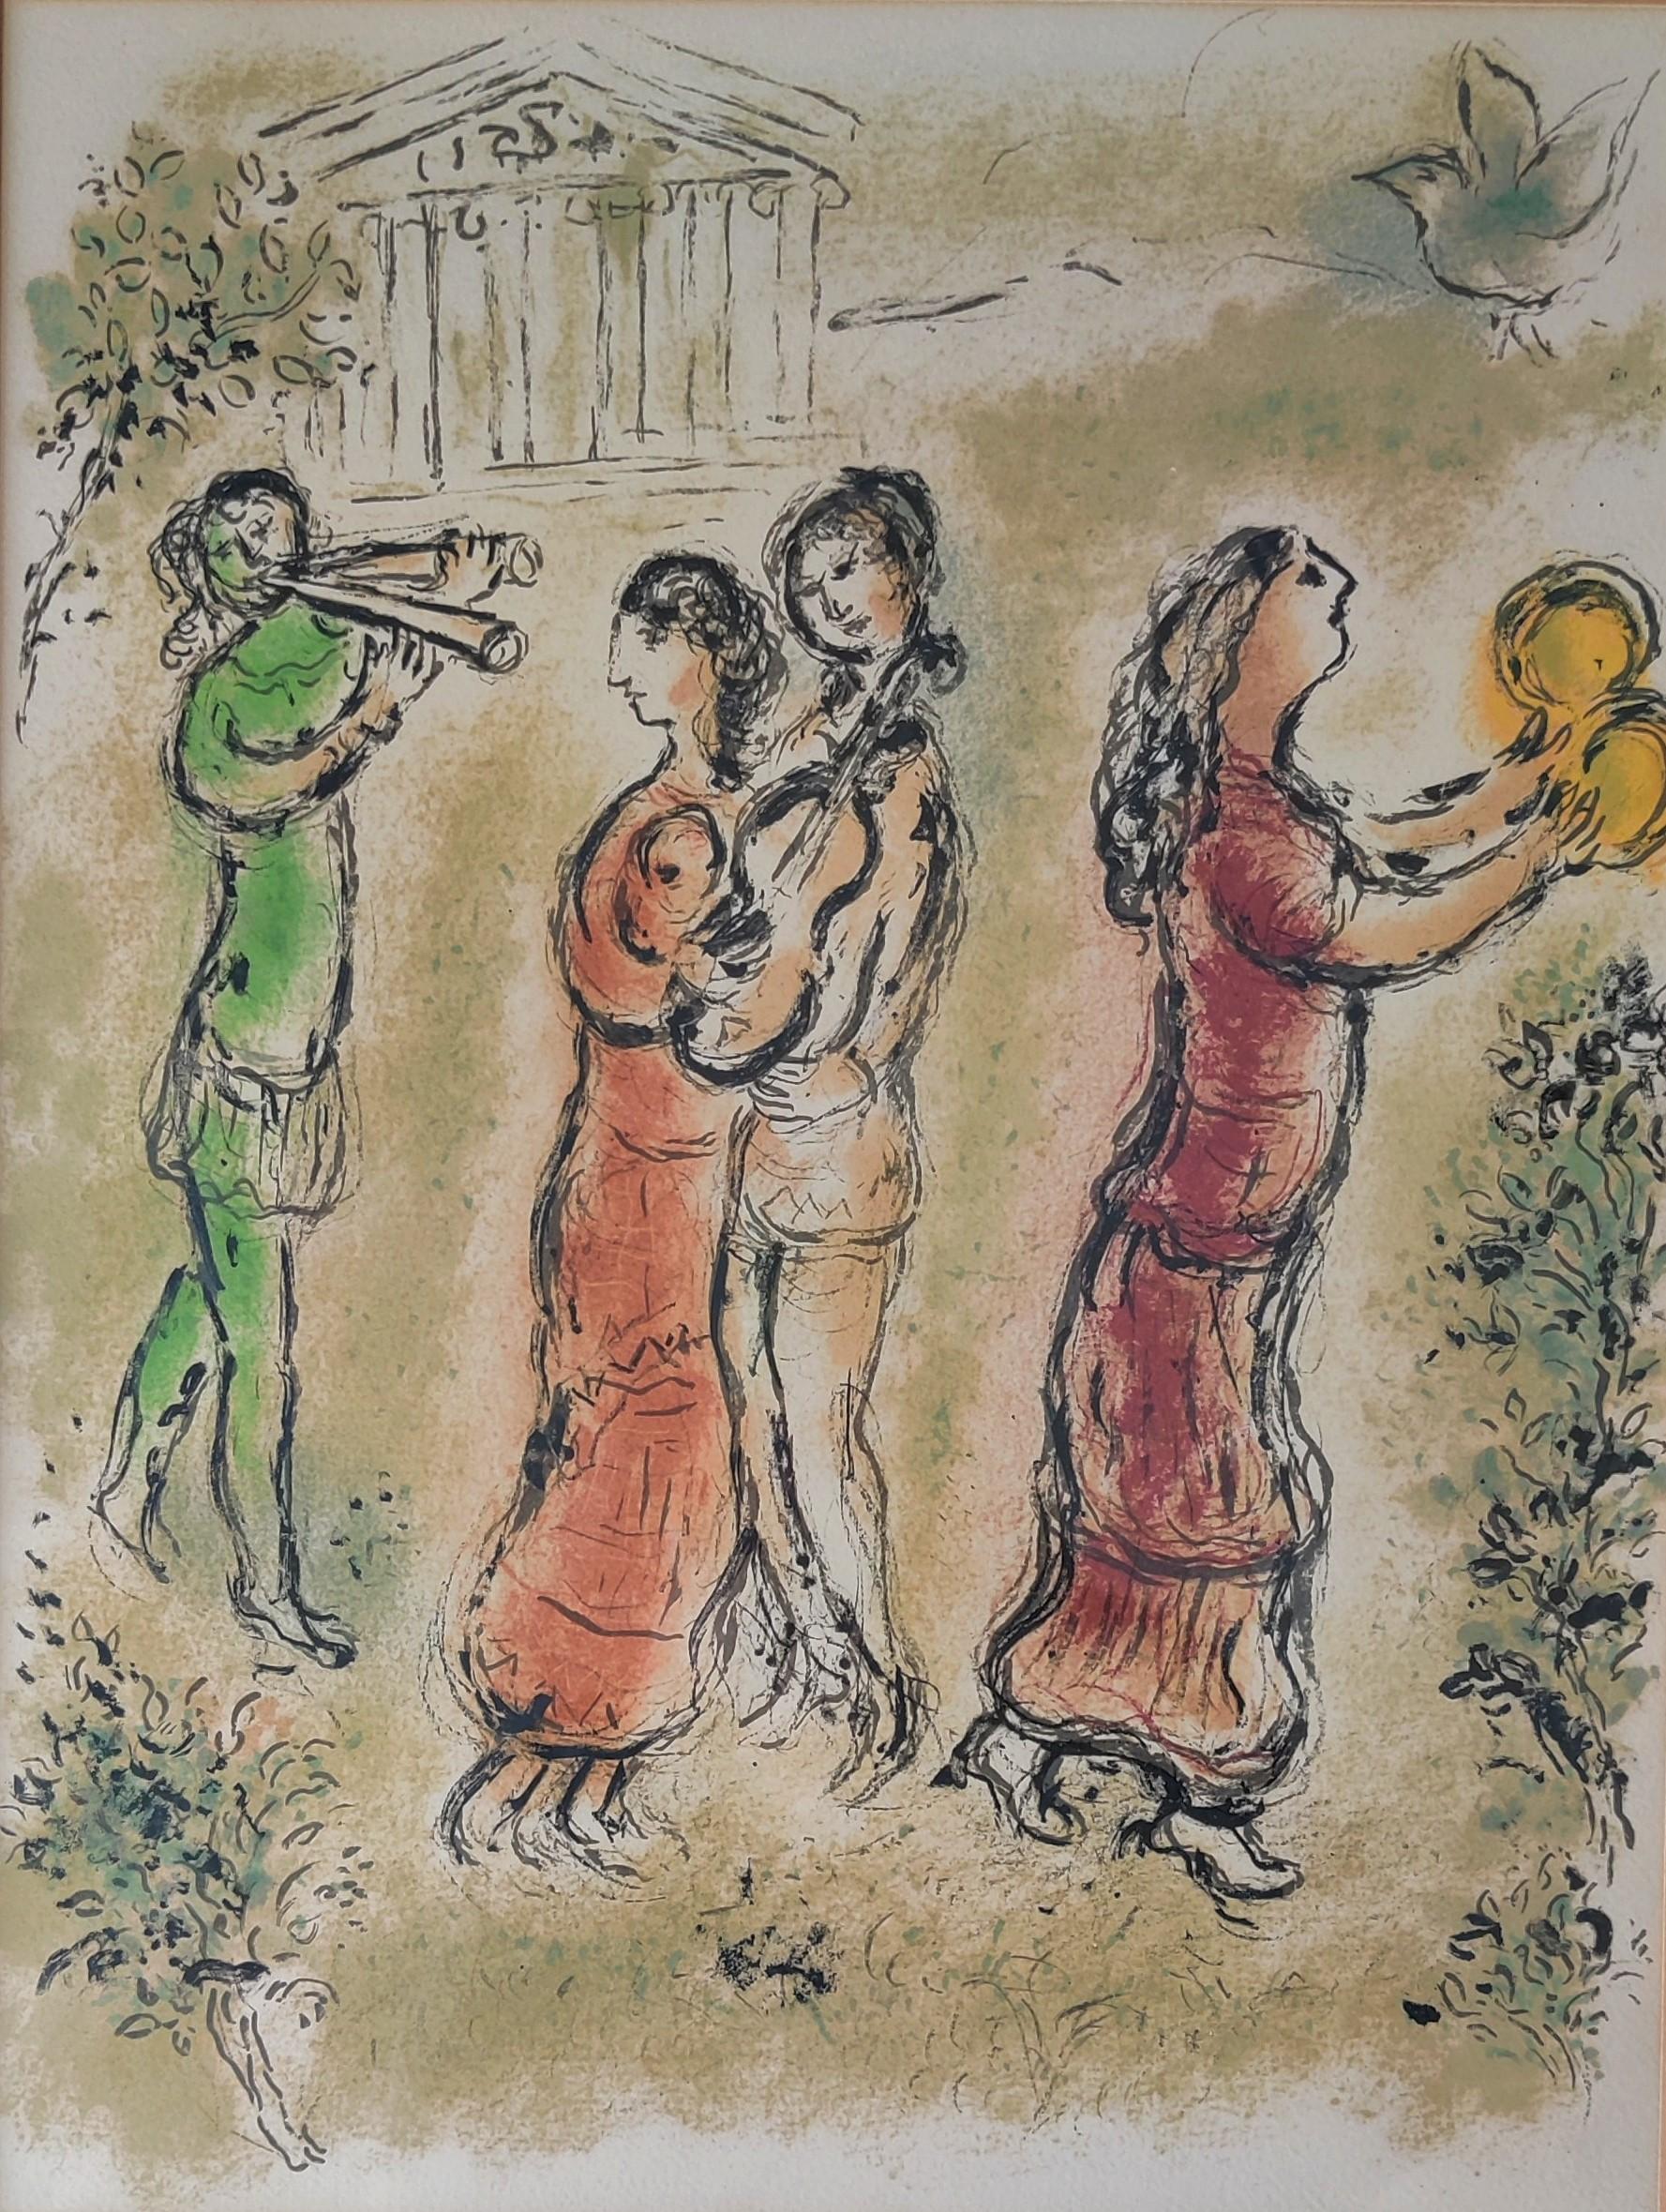 MARC CHAGALL  -- The Festival, from L'Odyssée, 1975
Lithograph in colours
Unsigned
Edition H.C. XVII / XX 
published by Mourlot, Paris
Literature    Mourlot 924; see Cramer books 96
COA included
Framed
Image: 41 x 30 cm
Frame: 58 x 49 x 2 cm